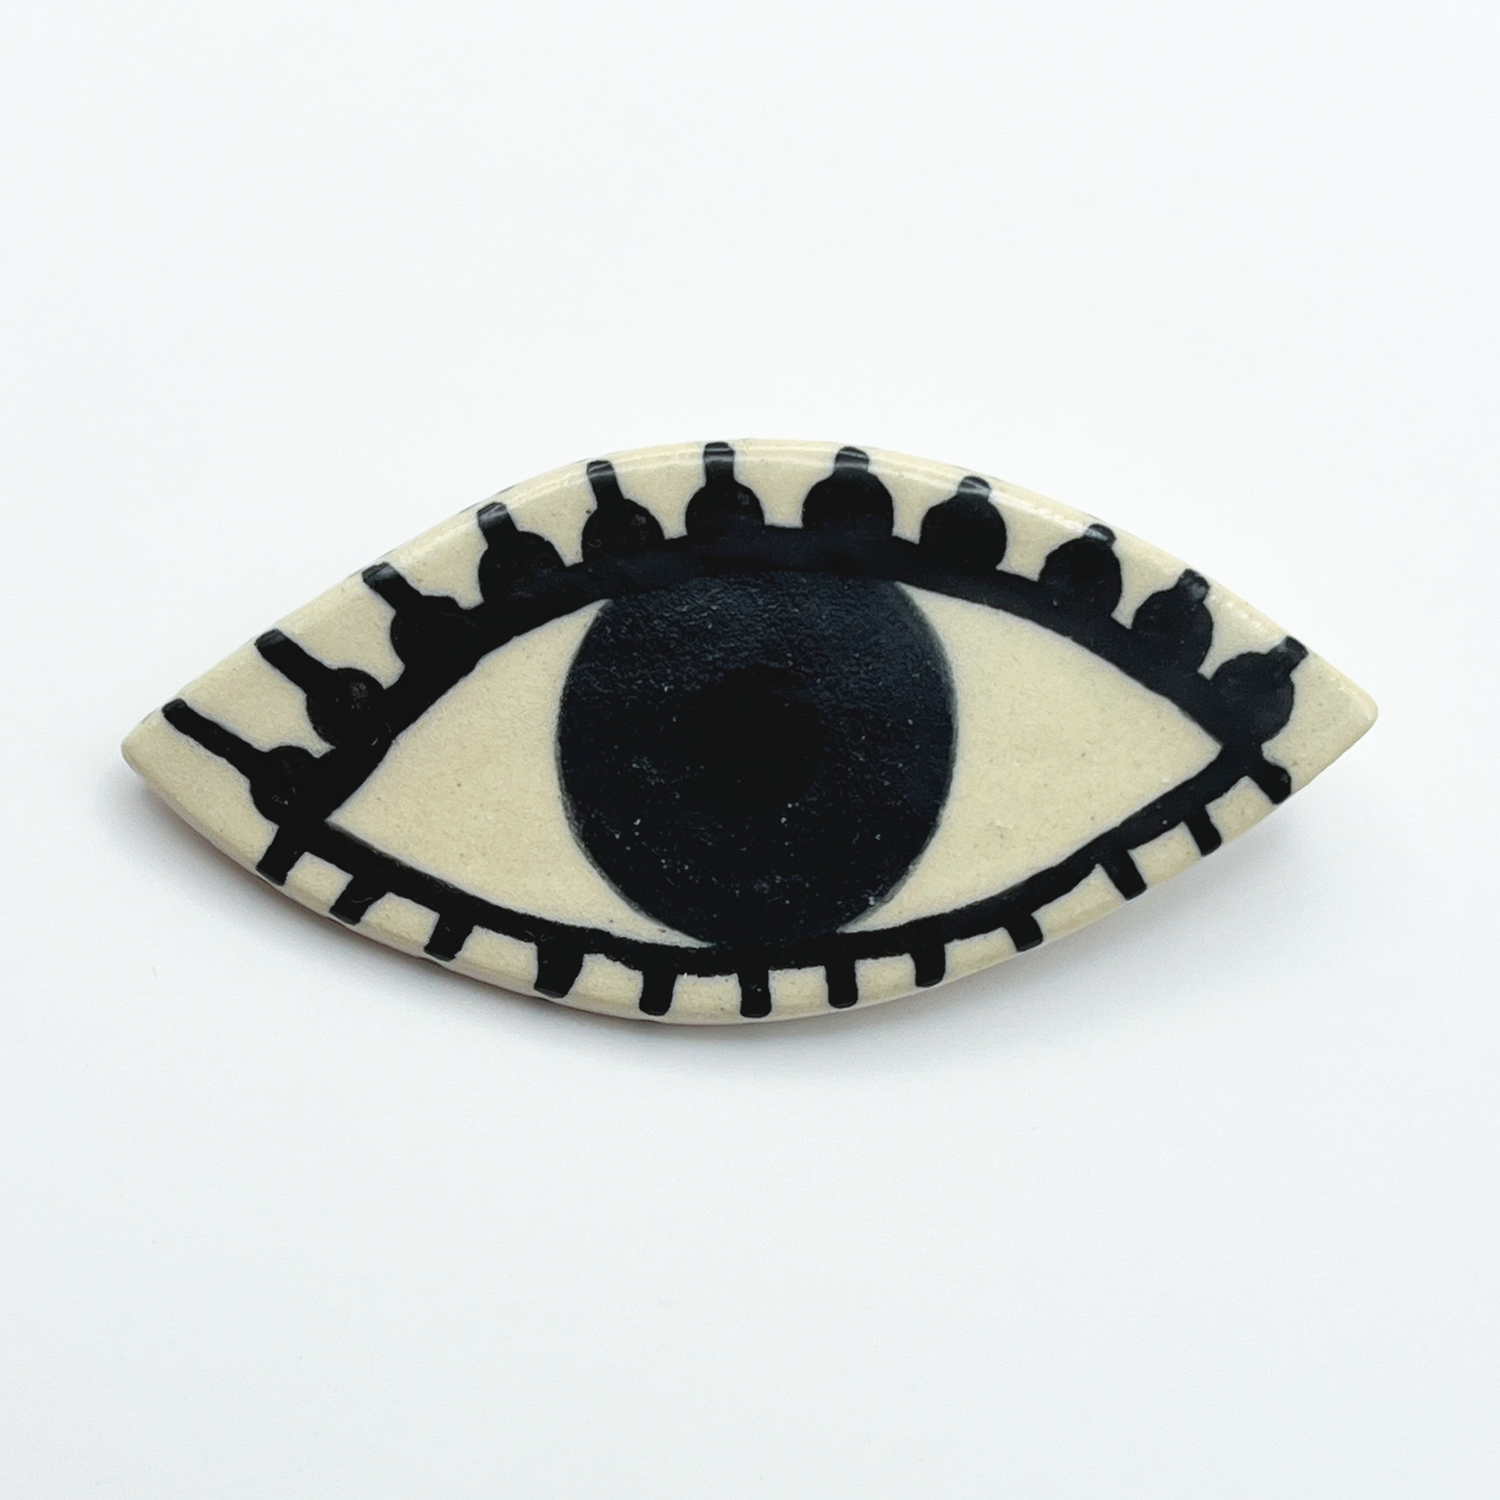 Here and Here: Green and Black Eye Brooch with Dotted Lashes Product Image 1 of 2